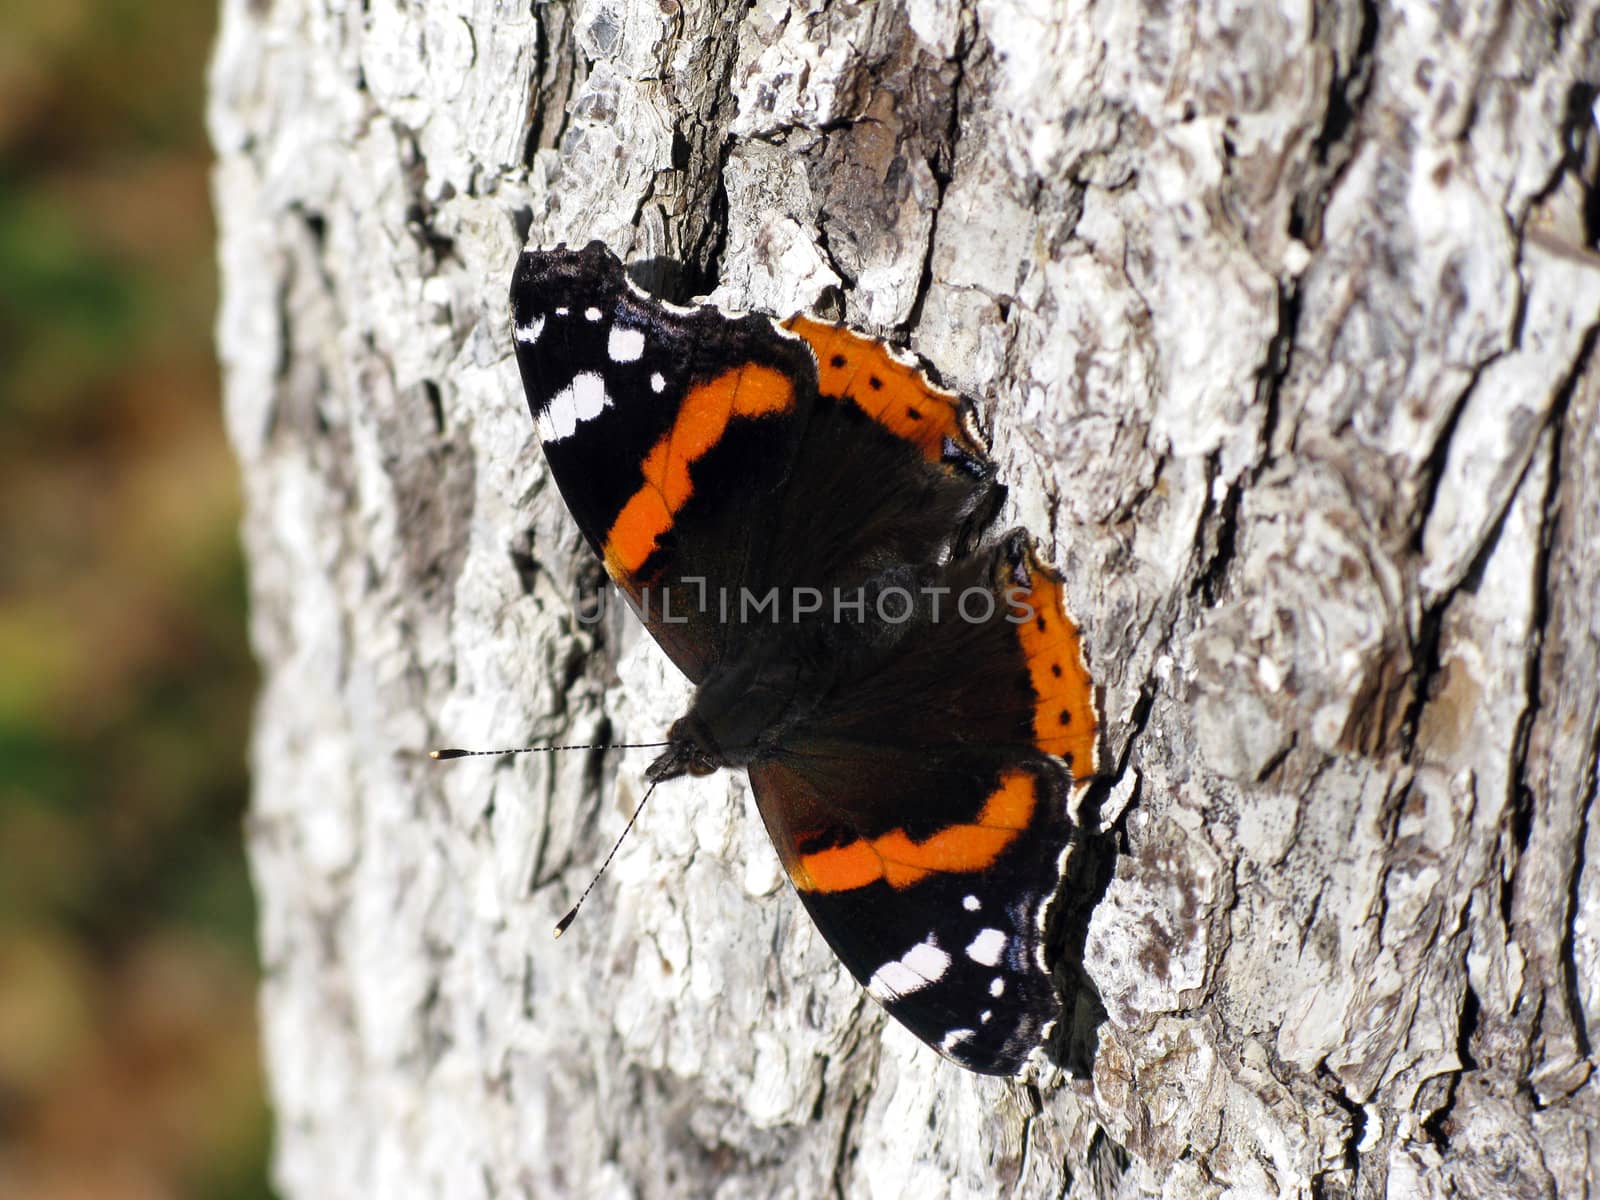 Butterfly on tree in an autumn forest